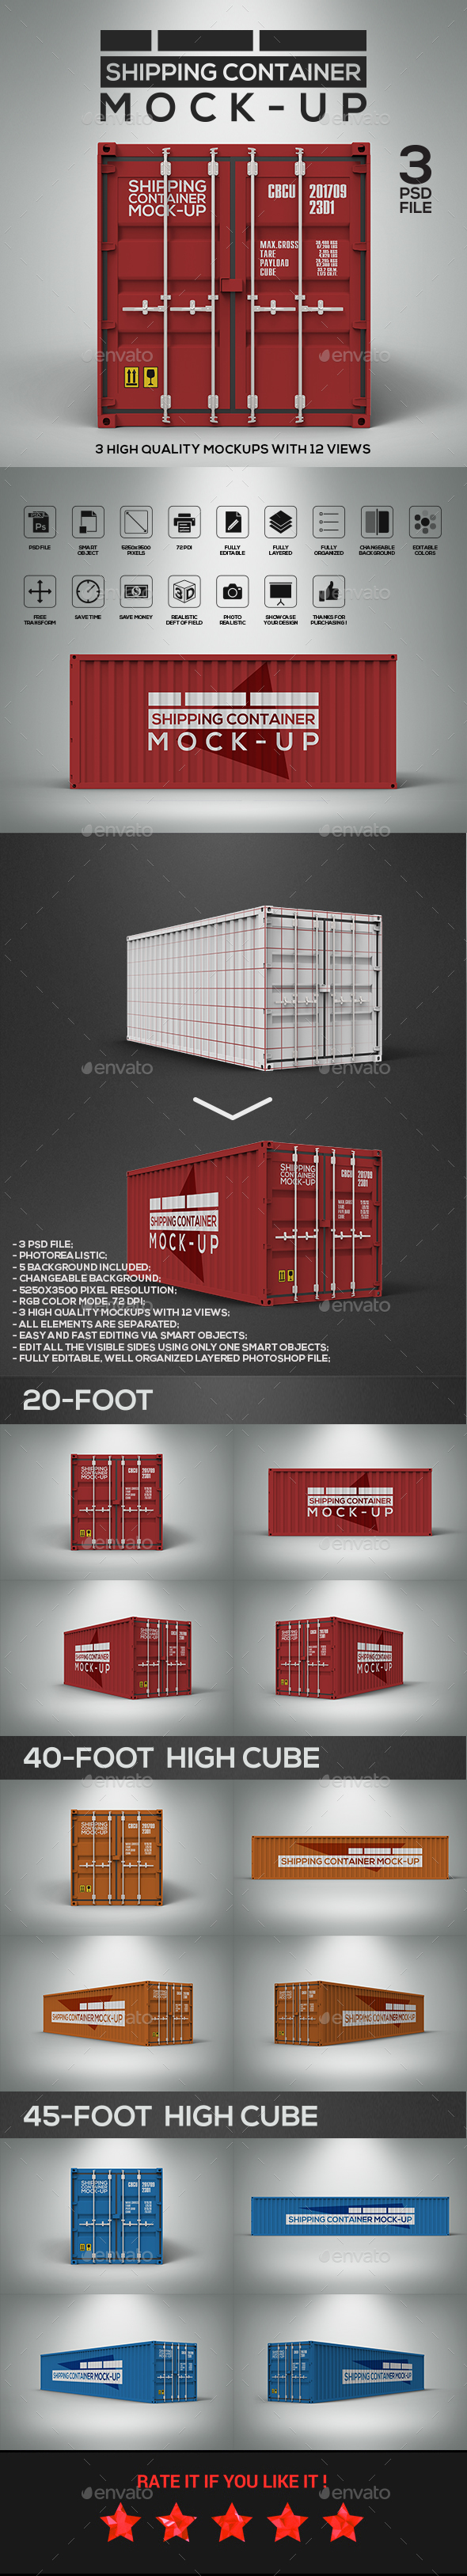 Download Shipping Container Mockup by 3background | GraphicRiver